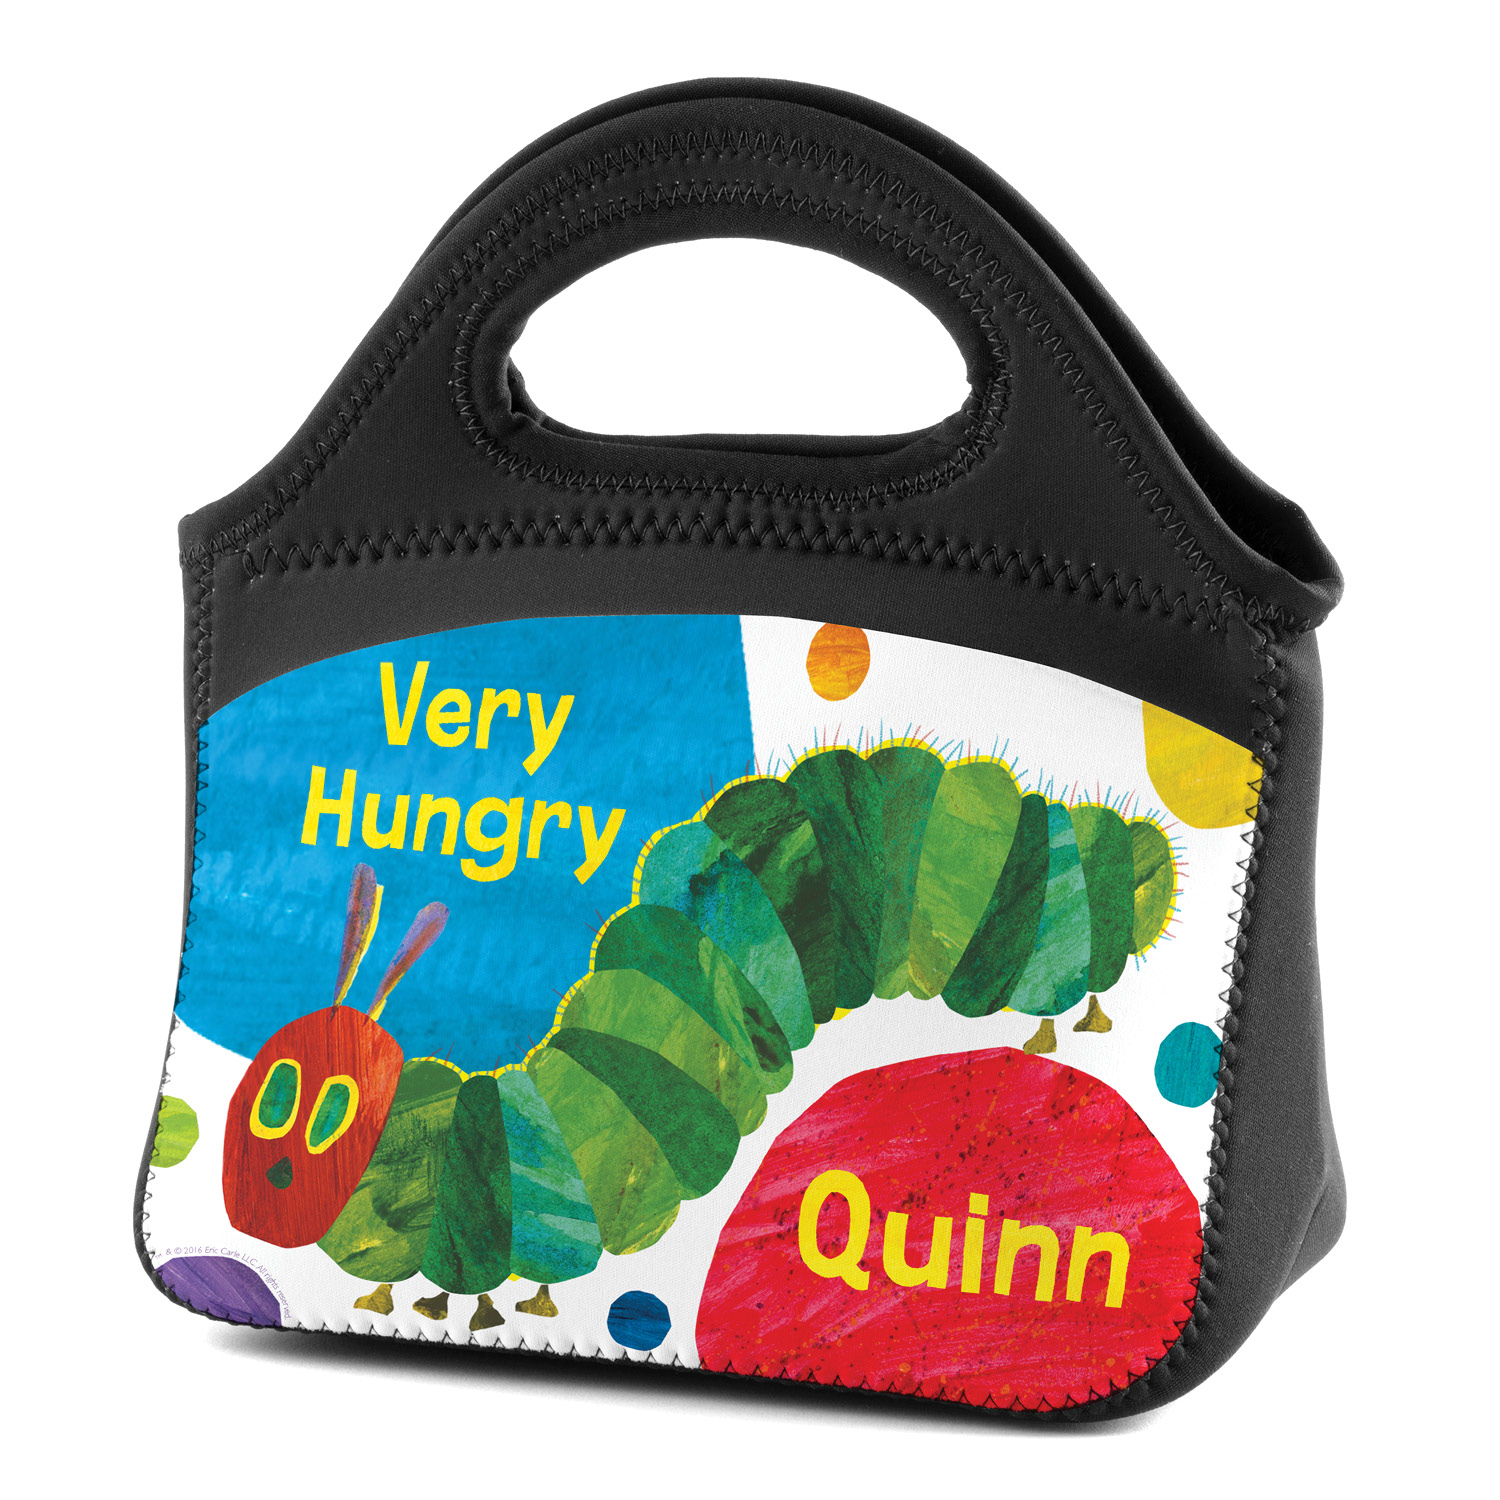 Very Hungry Caterpillar Hungry Lunch Tote